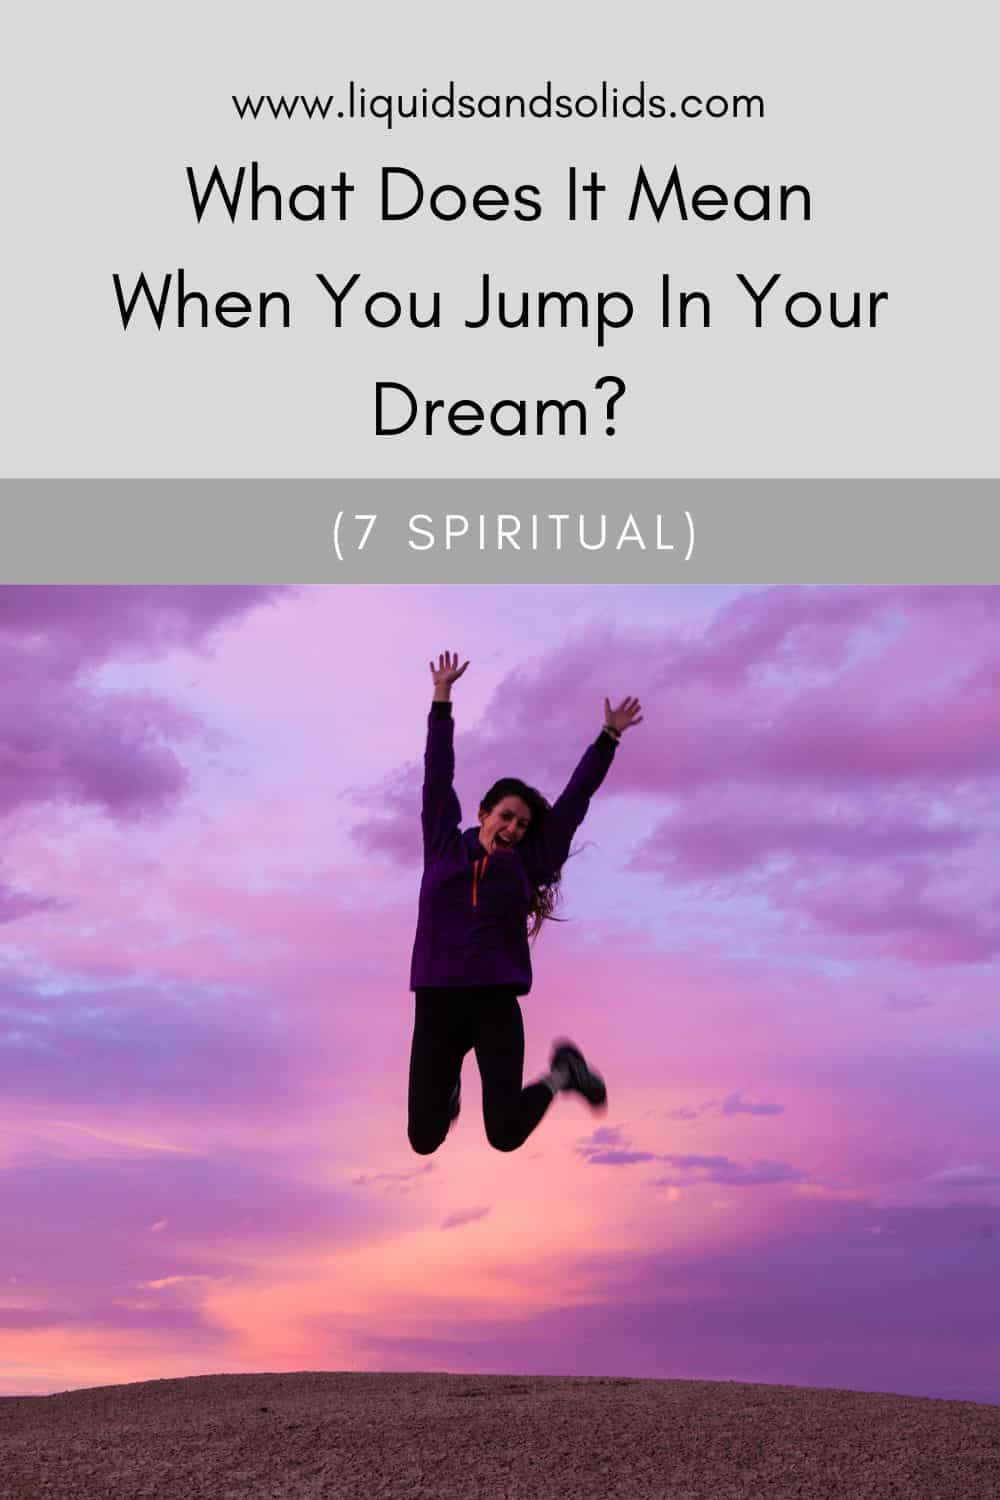 What Does It Mean When You Jump In Your Dream? (7 Spiritual)